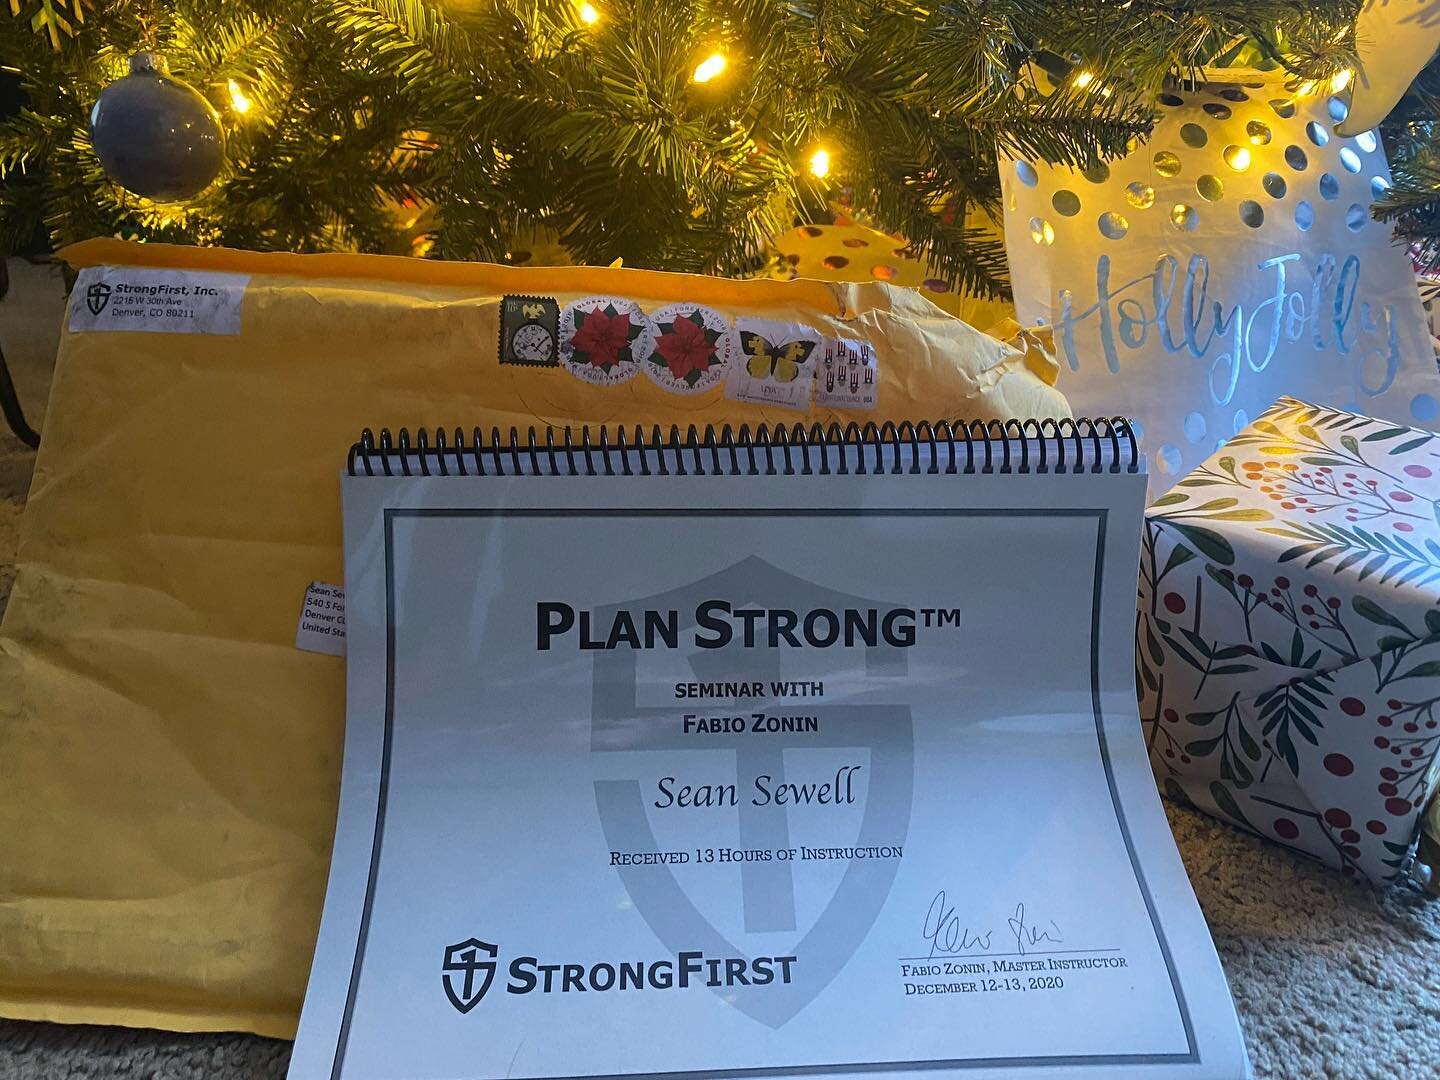 A nice Christmas present came today 😎💪
.
.
#strongfirst #alwayslearning #trainsmart #strengthandconditioning #strengthtoallandtoallagoodnight #planstrong #happyholidays